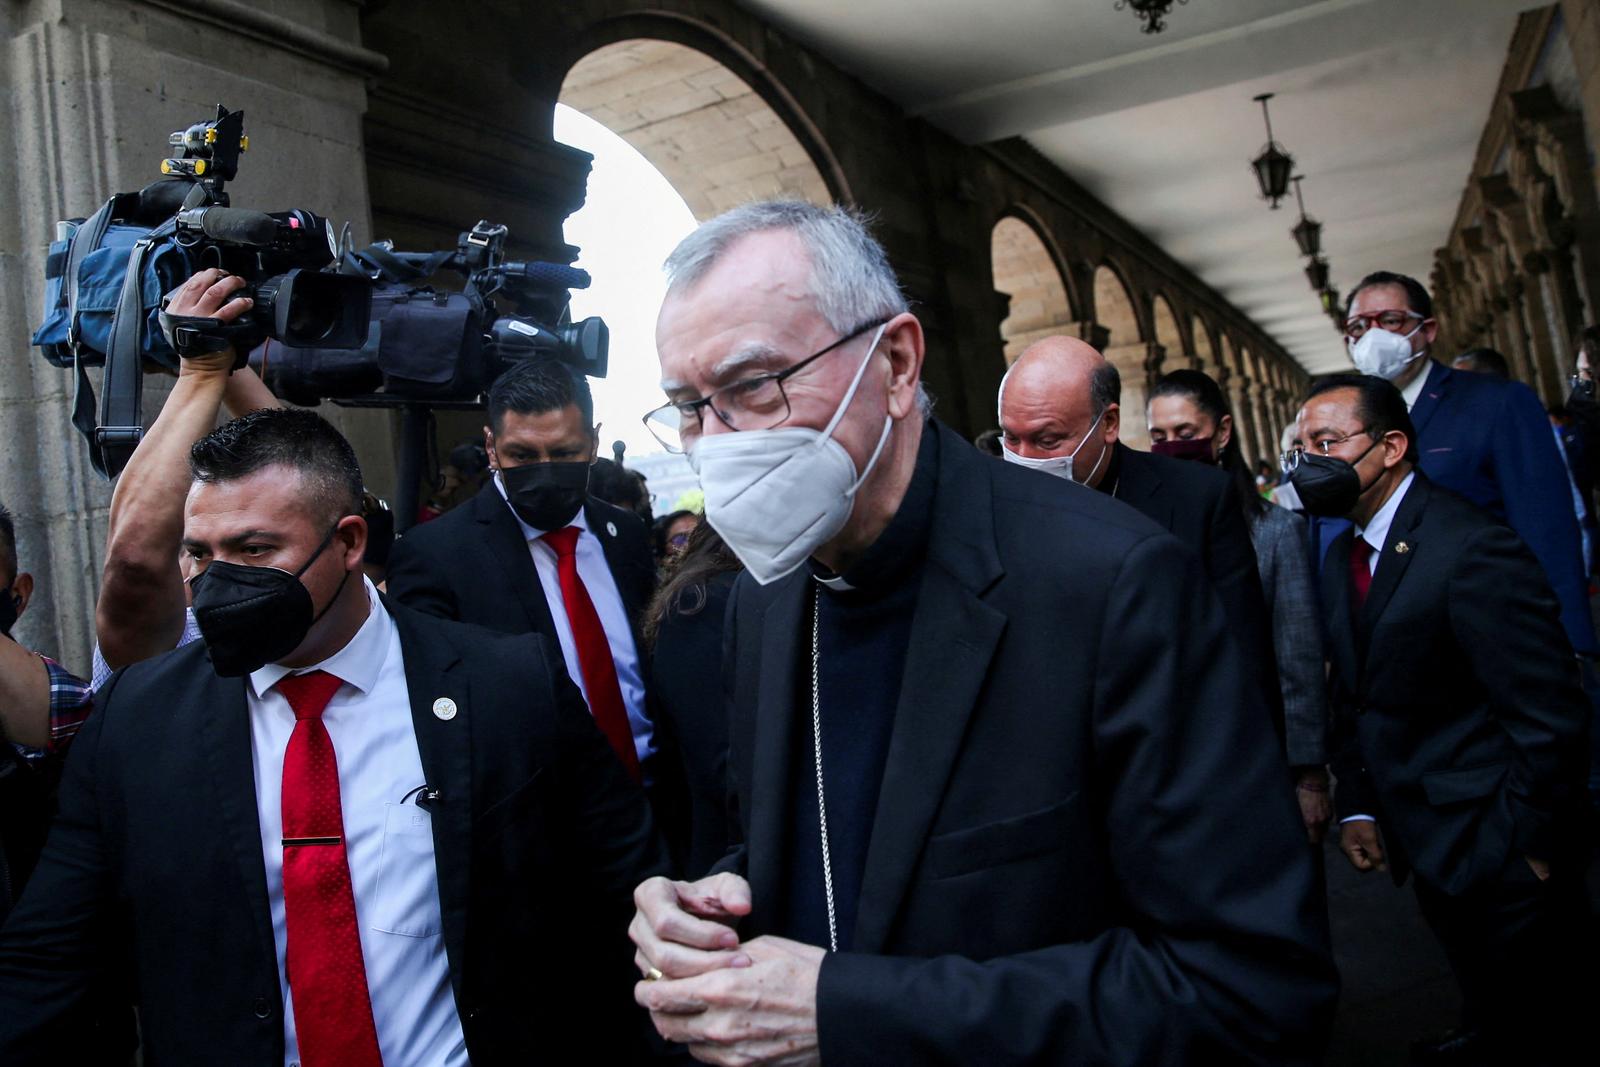 FILE PHOTO: Vatican Secretary of State Cardinal Pietro Parolin walks after receiving a Distinguished Guest recognition at the City Hall in Mexico City, Mexico June 21, 2021. REUTERS/Edgard Garrido/File Photo Photo: EDGARD GARRIDO/REUTERS